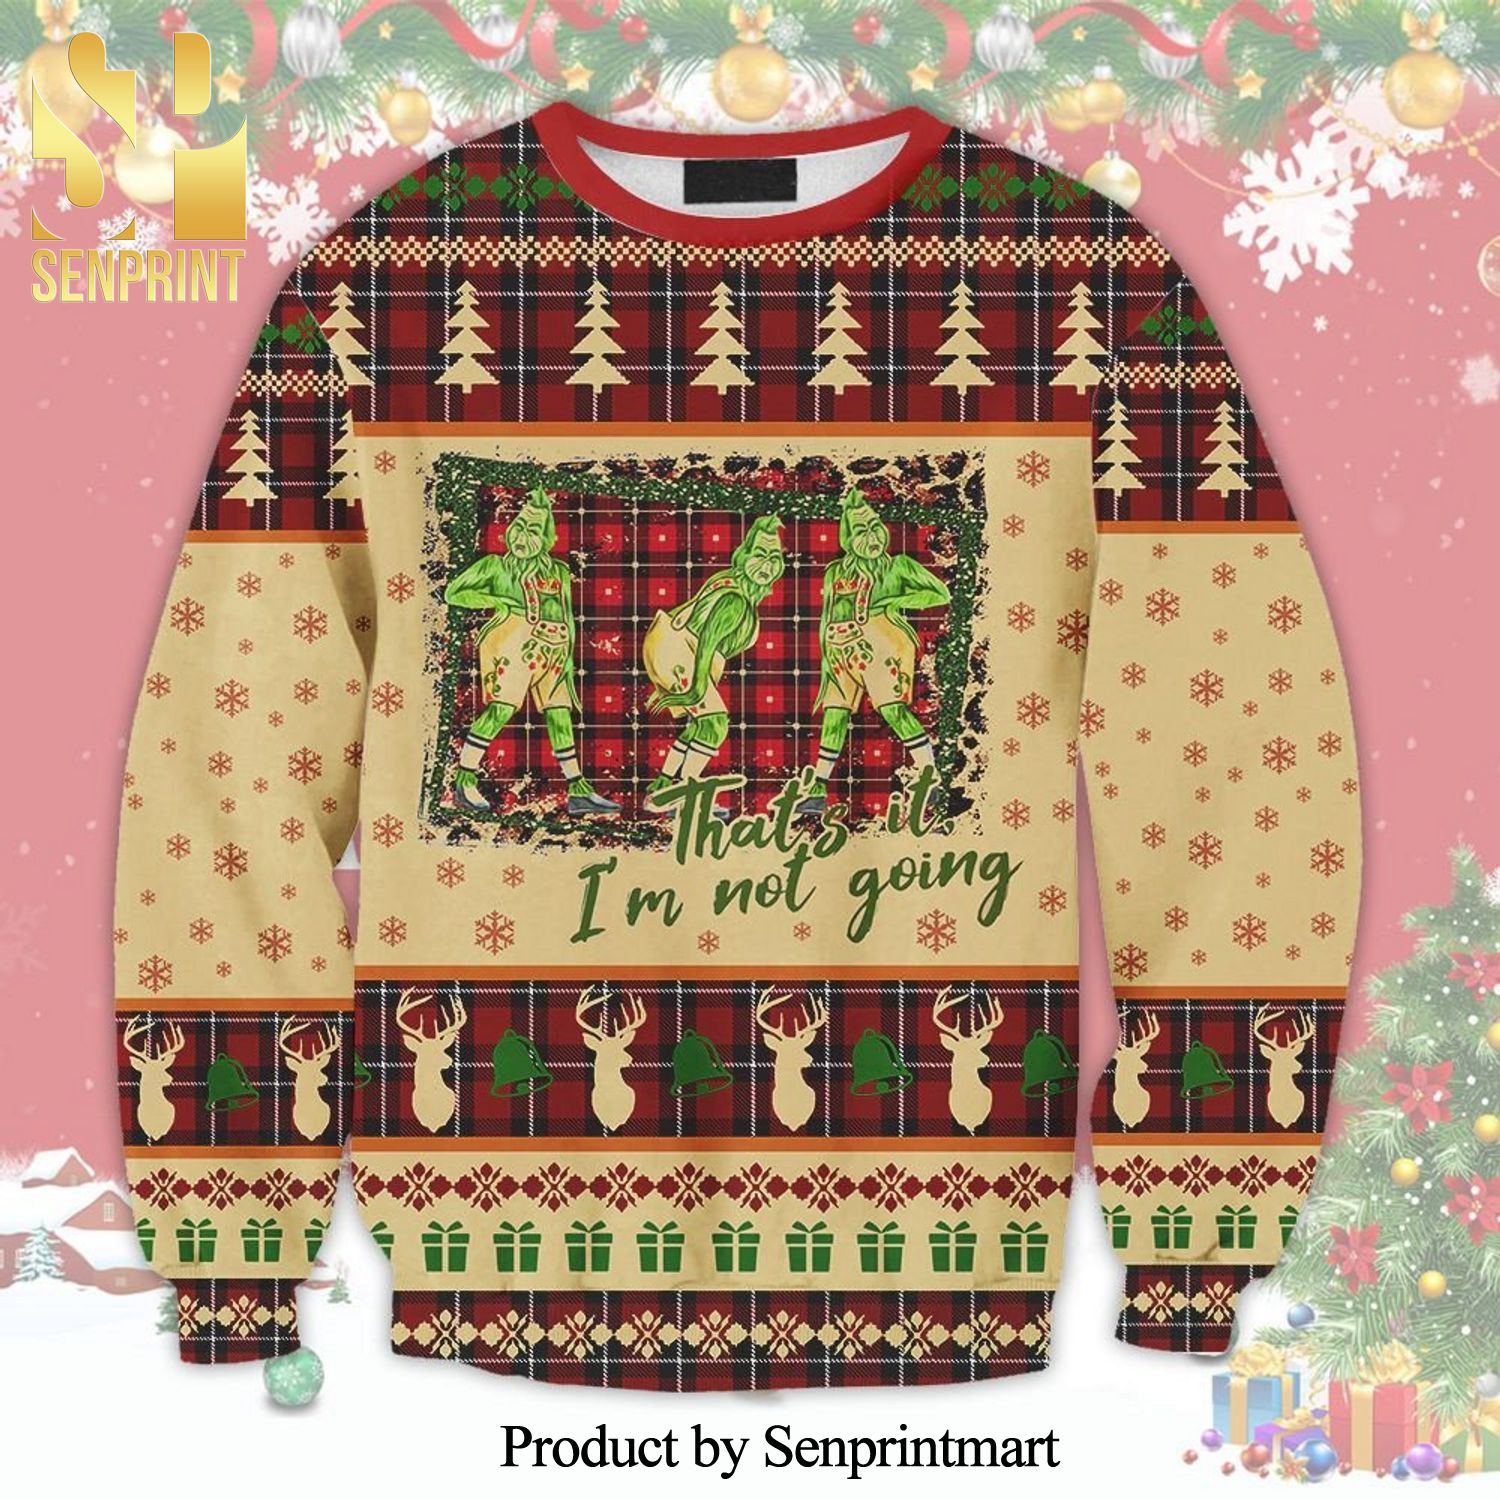 Grinch Stole Christmas That’s It I’m not Going Knitted Ugly Christmas Sweater